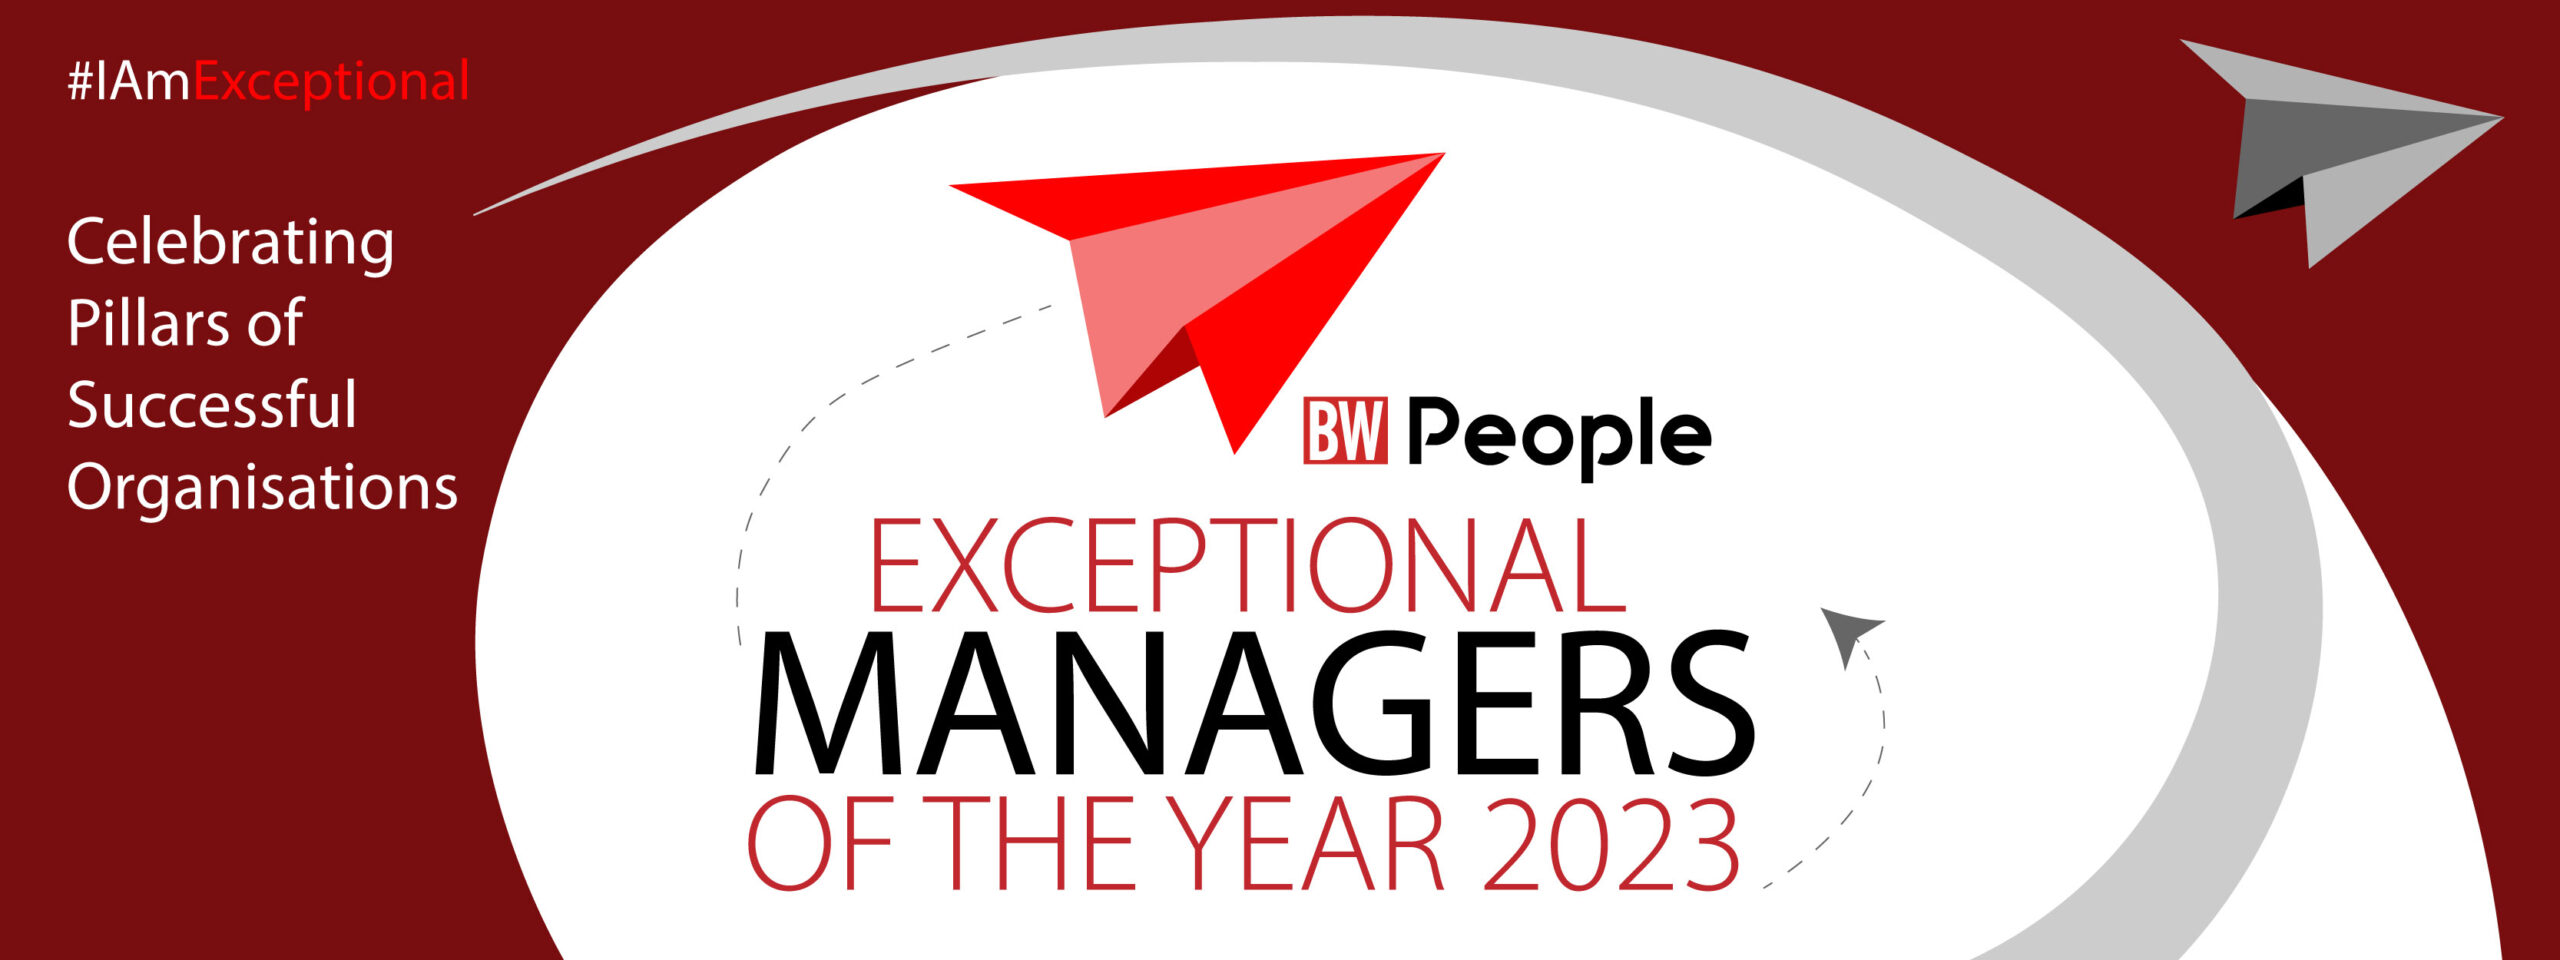 Exceptional Managers of the Year Awards